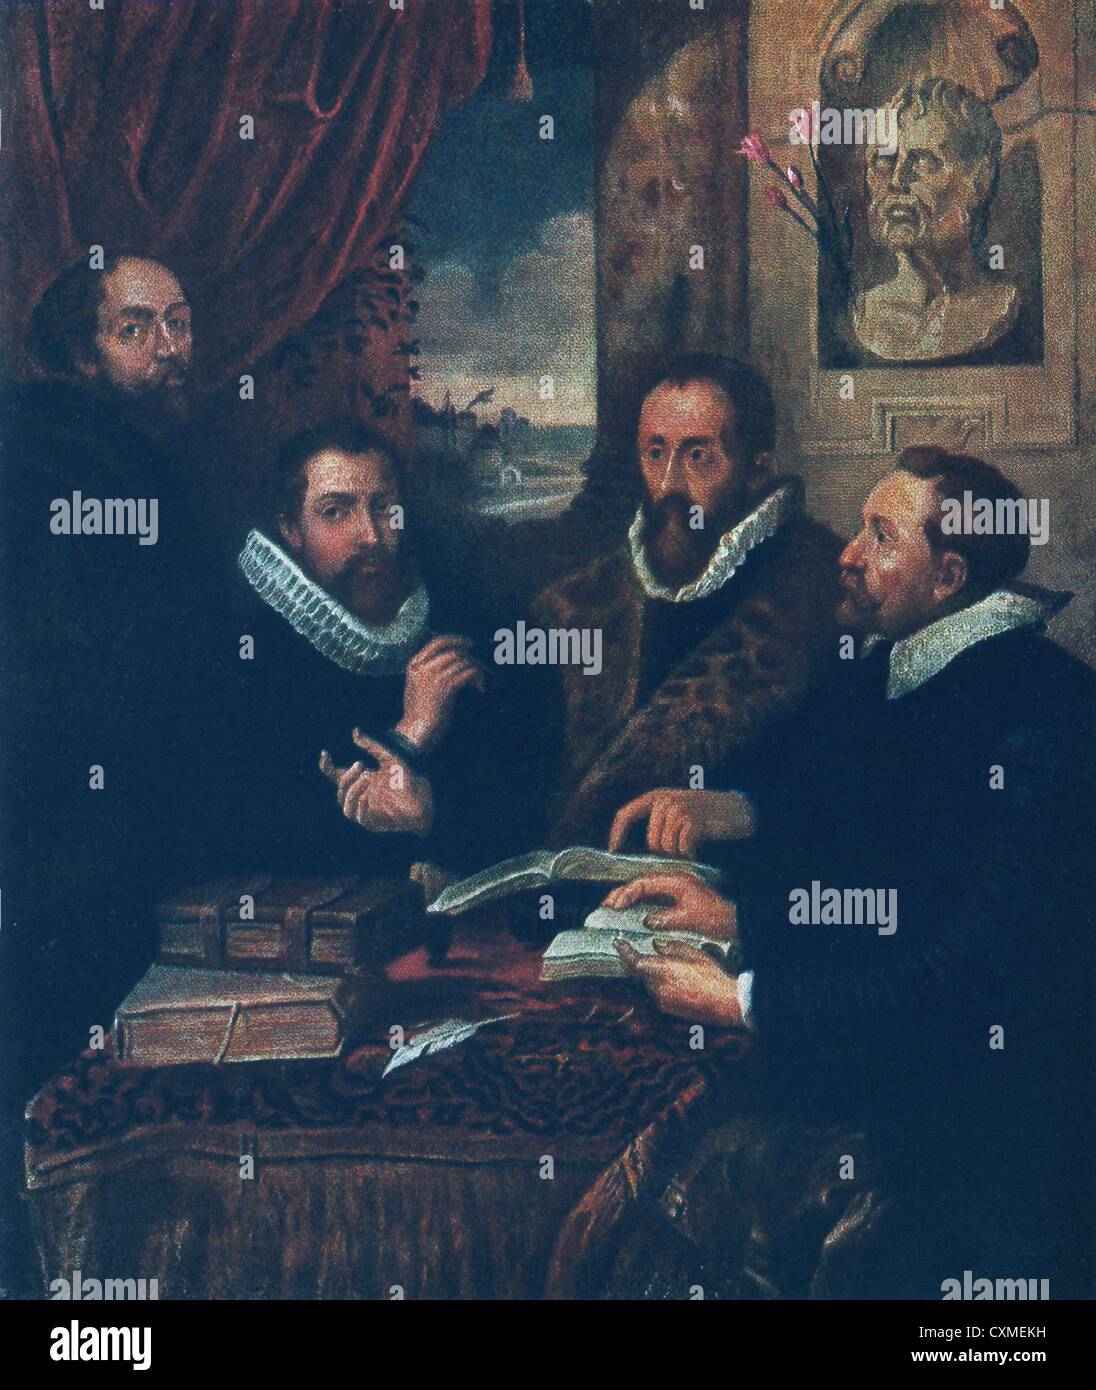 Painted by Peter Paul Rubens, Four Philosophers shows Lipsius, pupil, Rubens at far left, and his brother next to him. Stock Photo